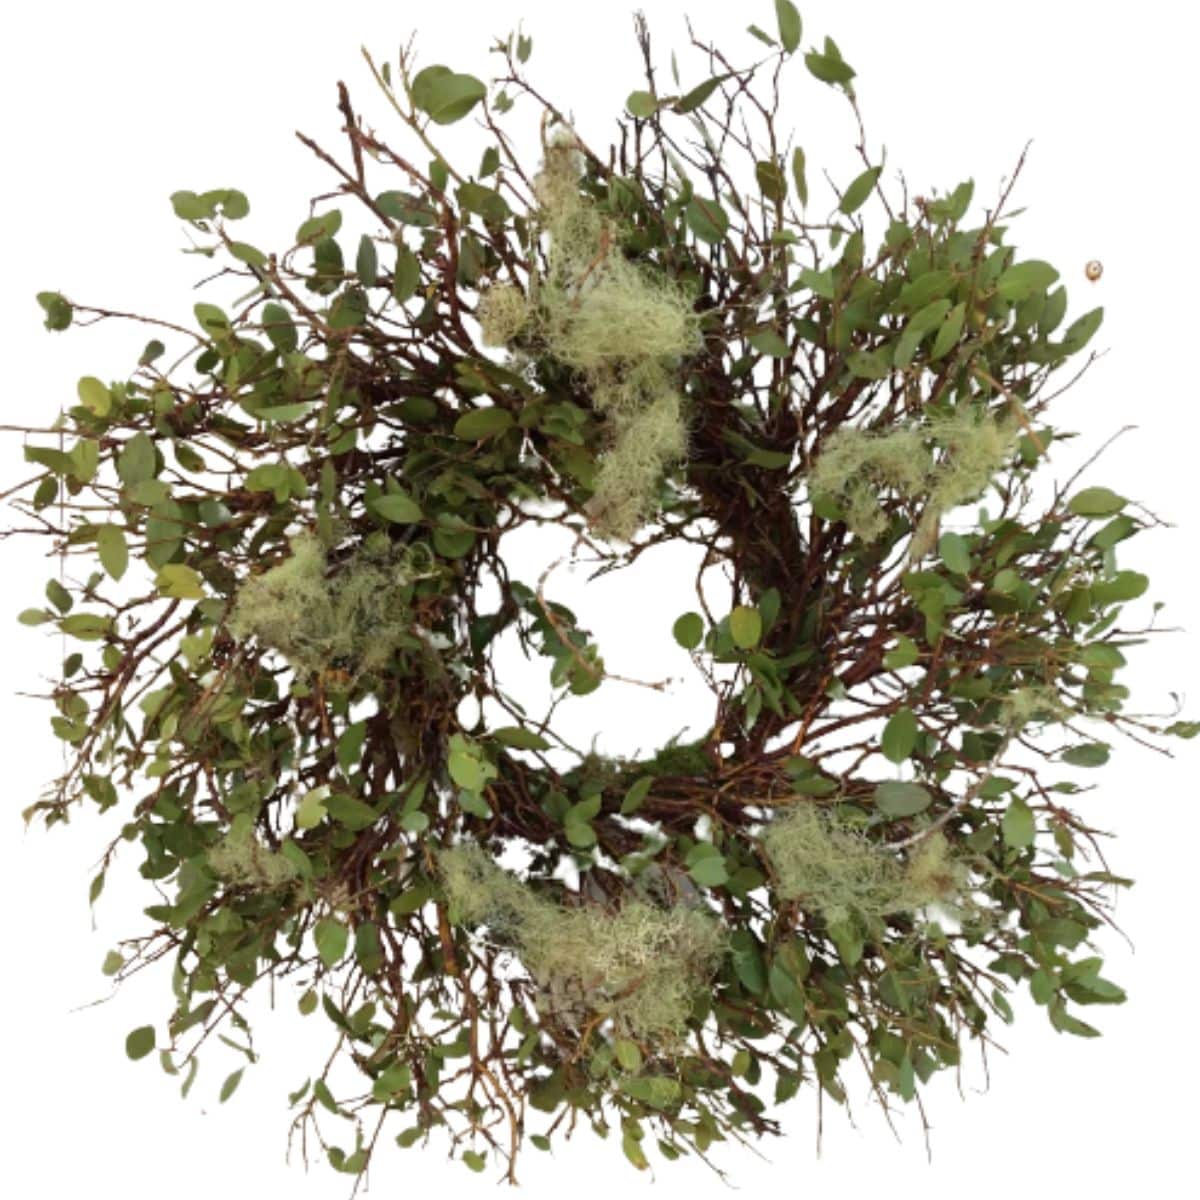 twig wreath with manzanita branches, green foliage and lichen branches from etsy